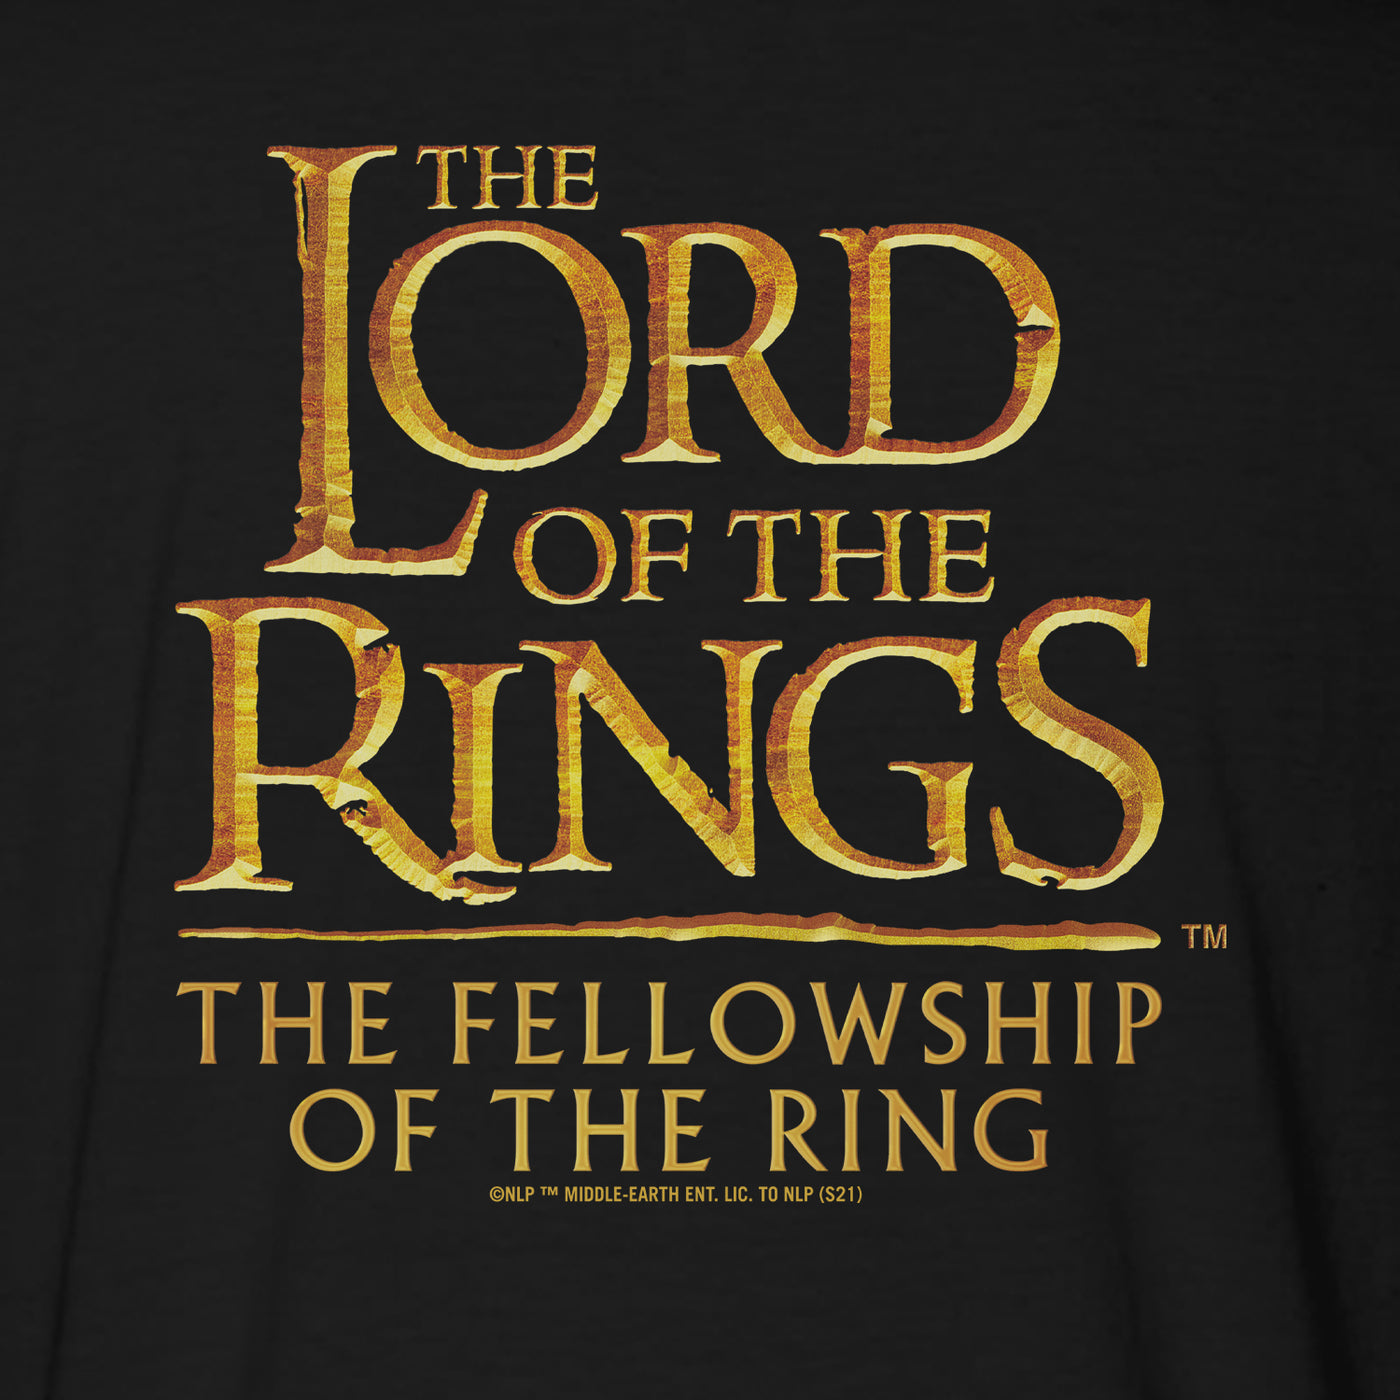 The Lord of the Rings 20th Anniversary The Fellowship of the Ring T-Shirt